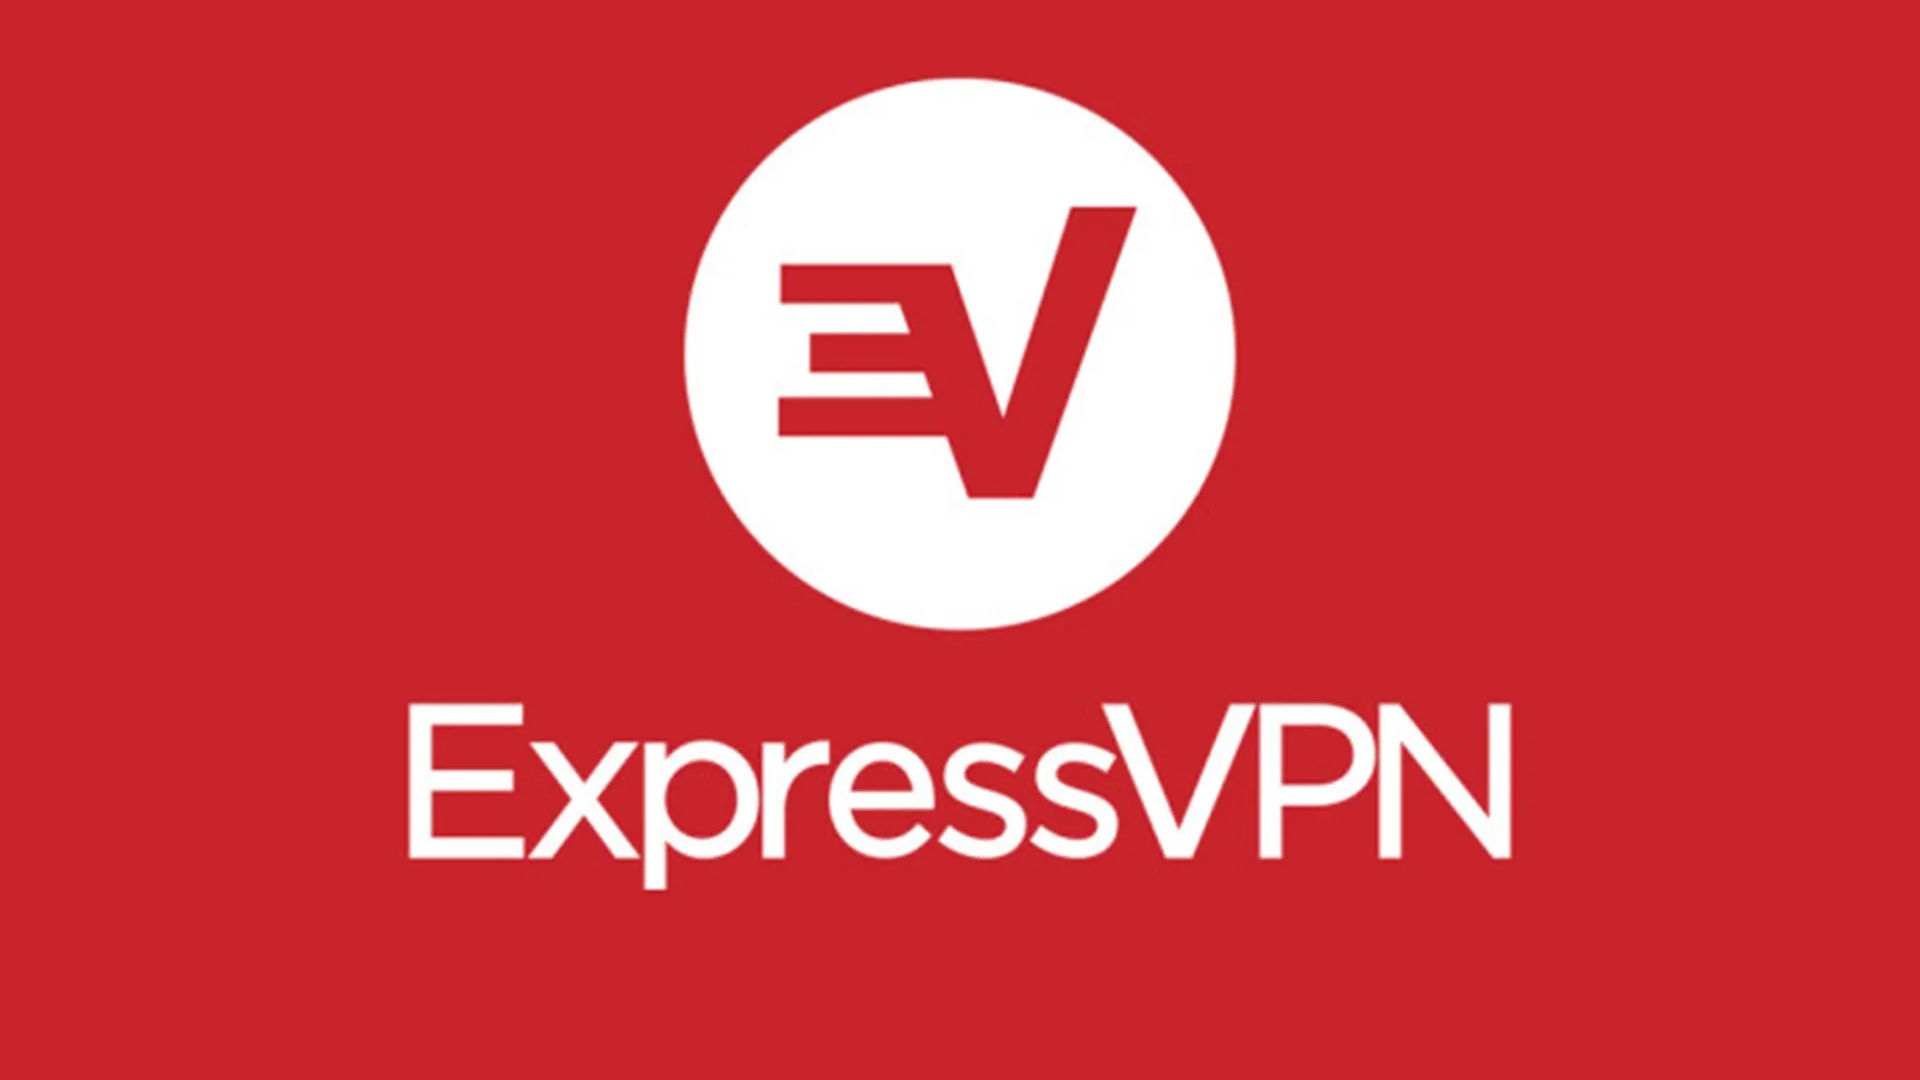 Best VPN apps: ExpressVPN. Image shows the company logo on a red background.